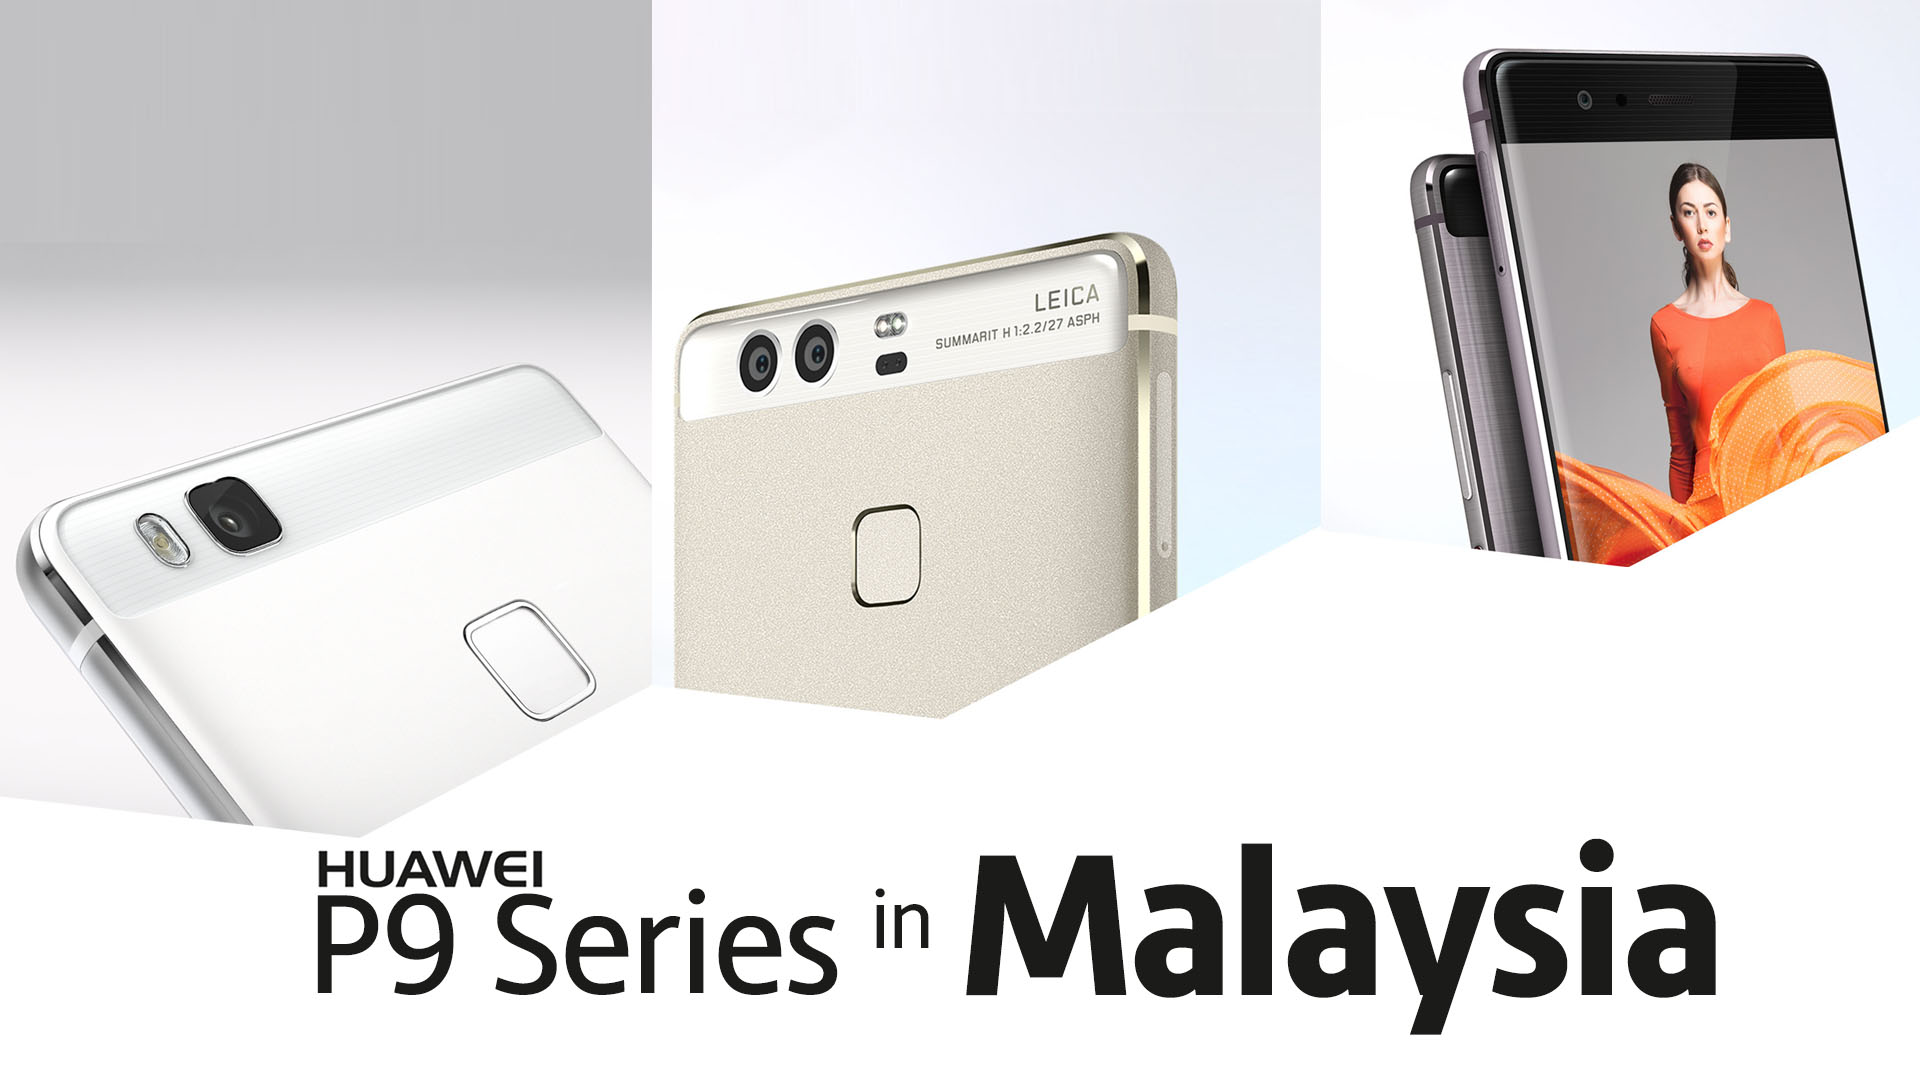 Huawei P9 Series in Malaysia: Comparing the P9 Series